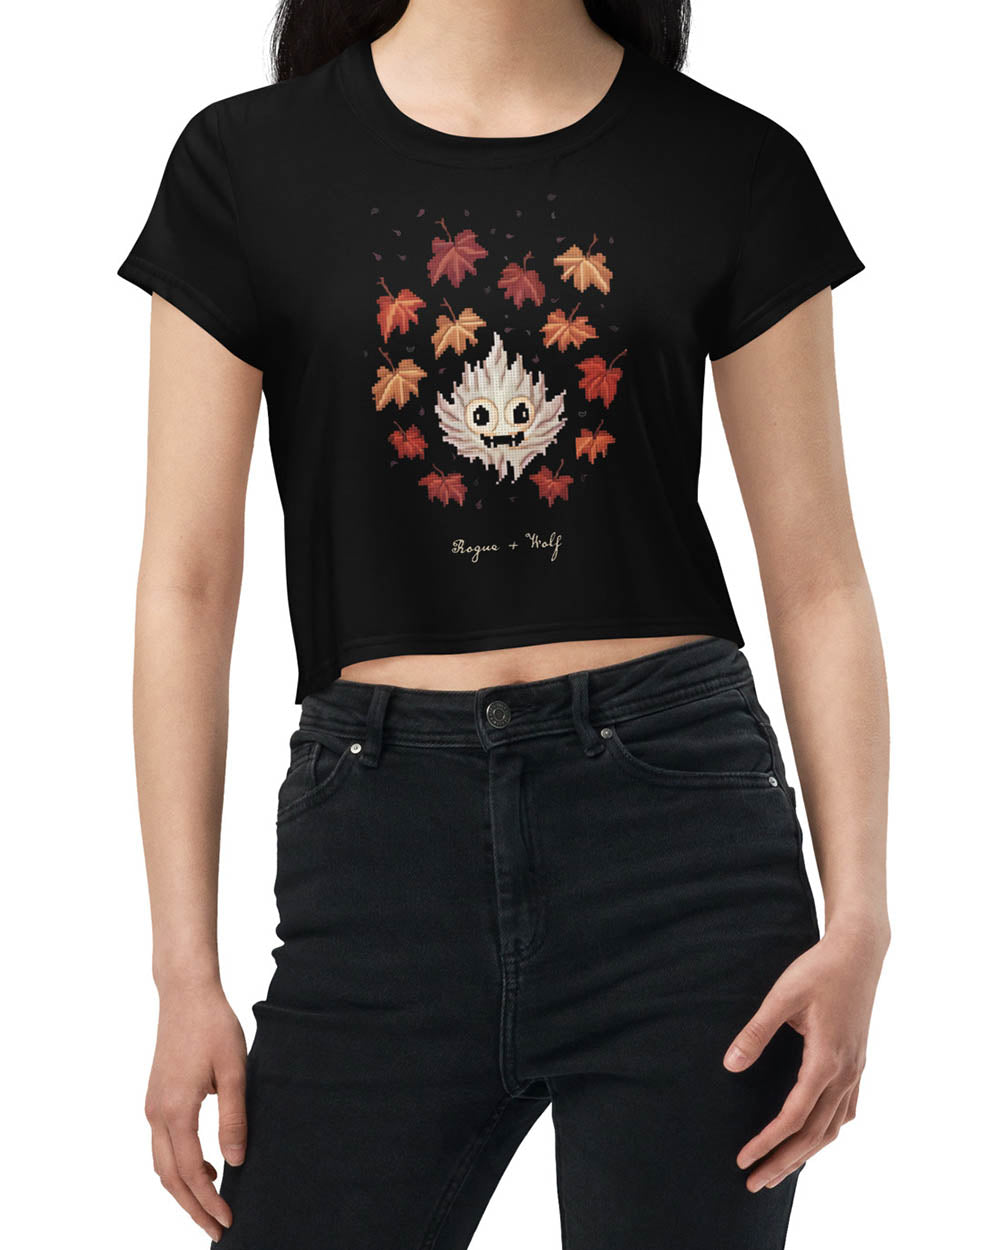 Maple Ghosty Short Sleeve Crop Top - Dark Academia Spooky Ghost Tee, Witchy Gothic Occult Vegan Fashion, Xmas Goth Gifts